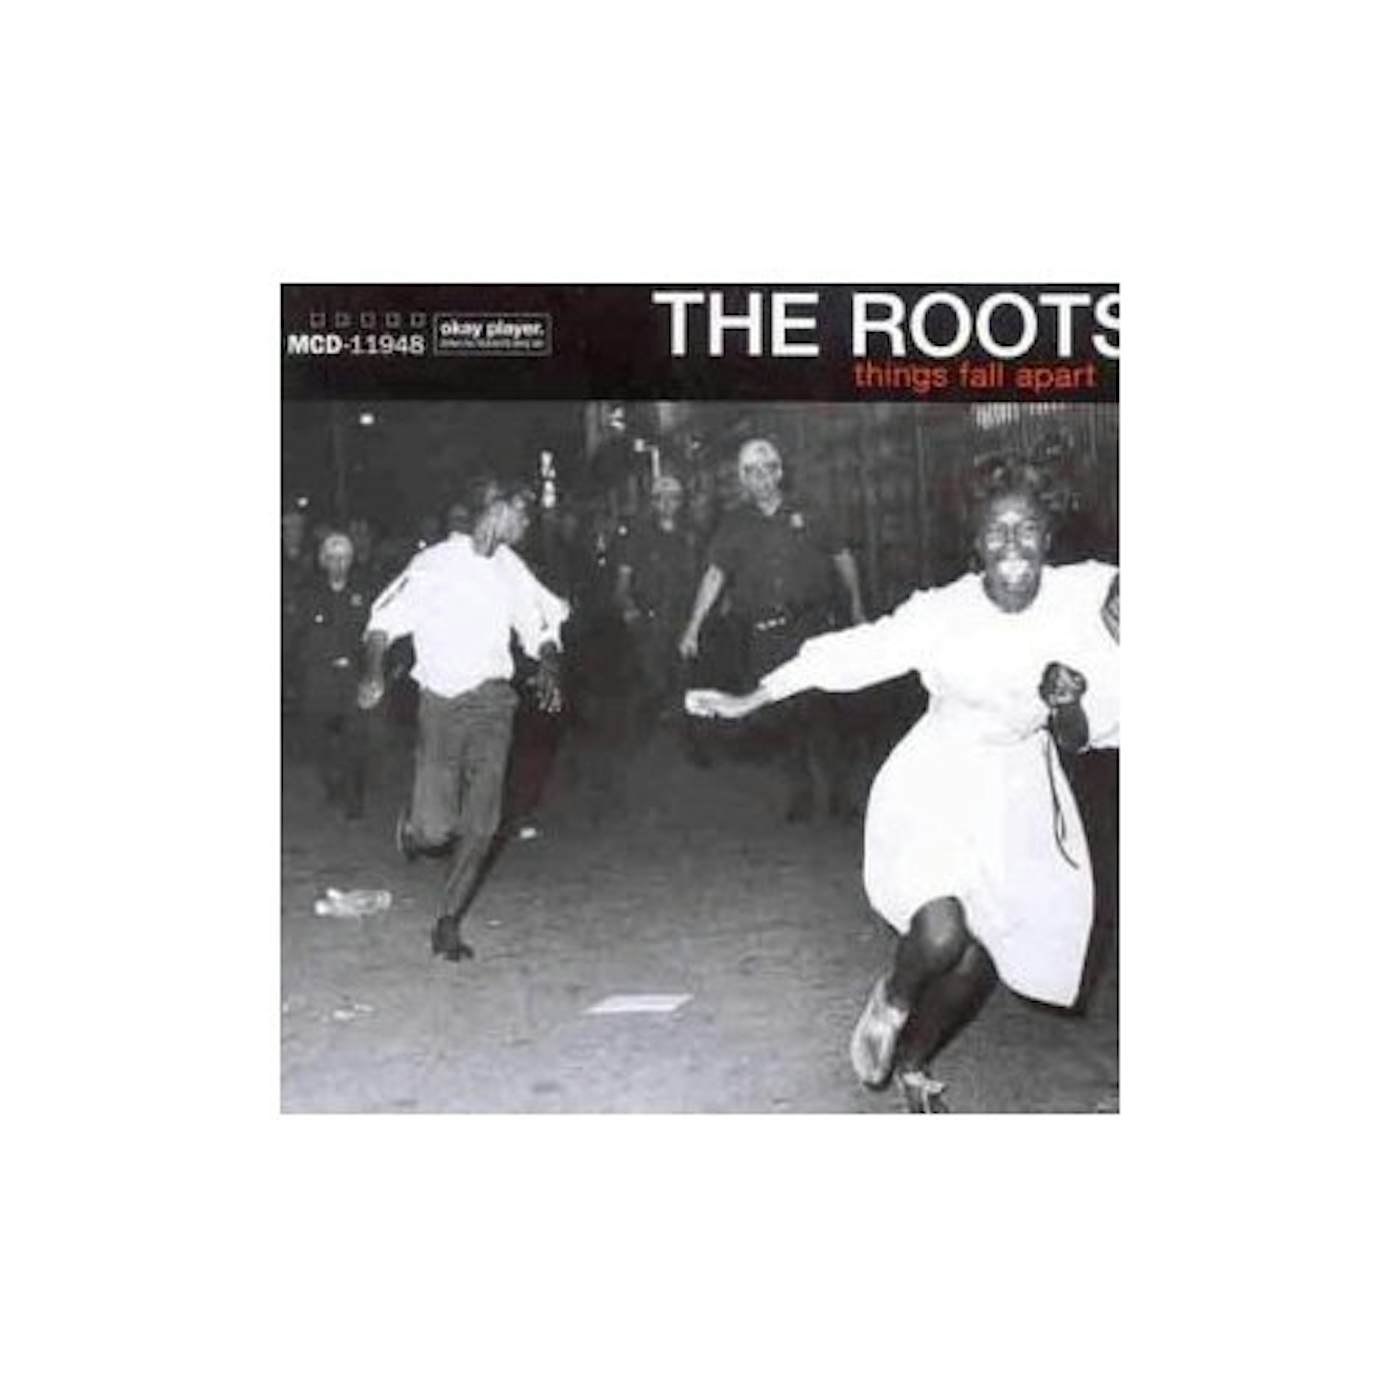 The Roots Things Fall Apart Vinyl Record